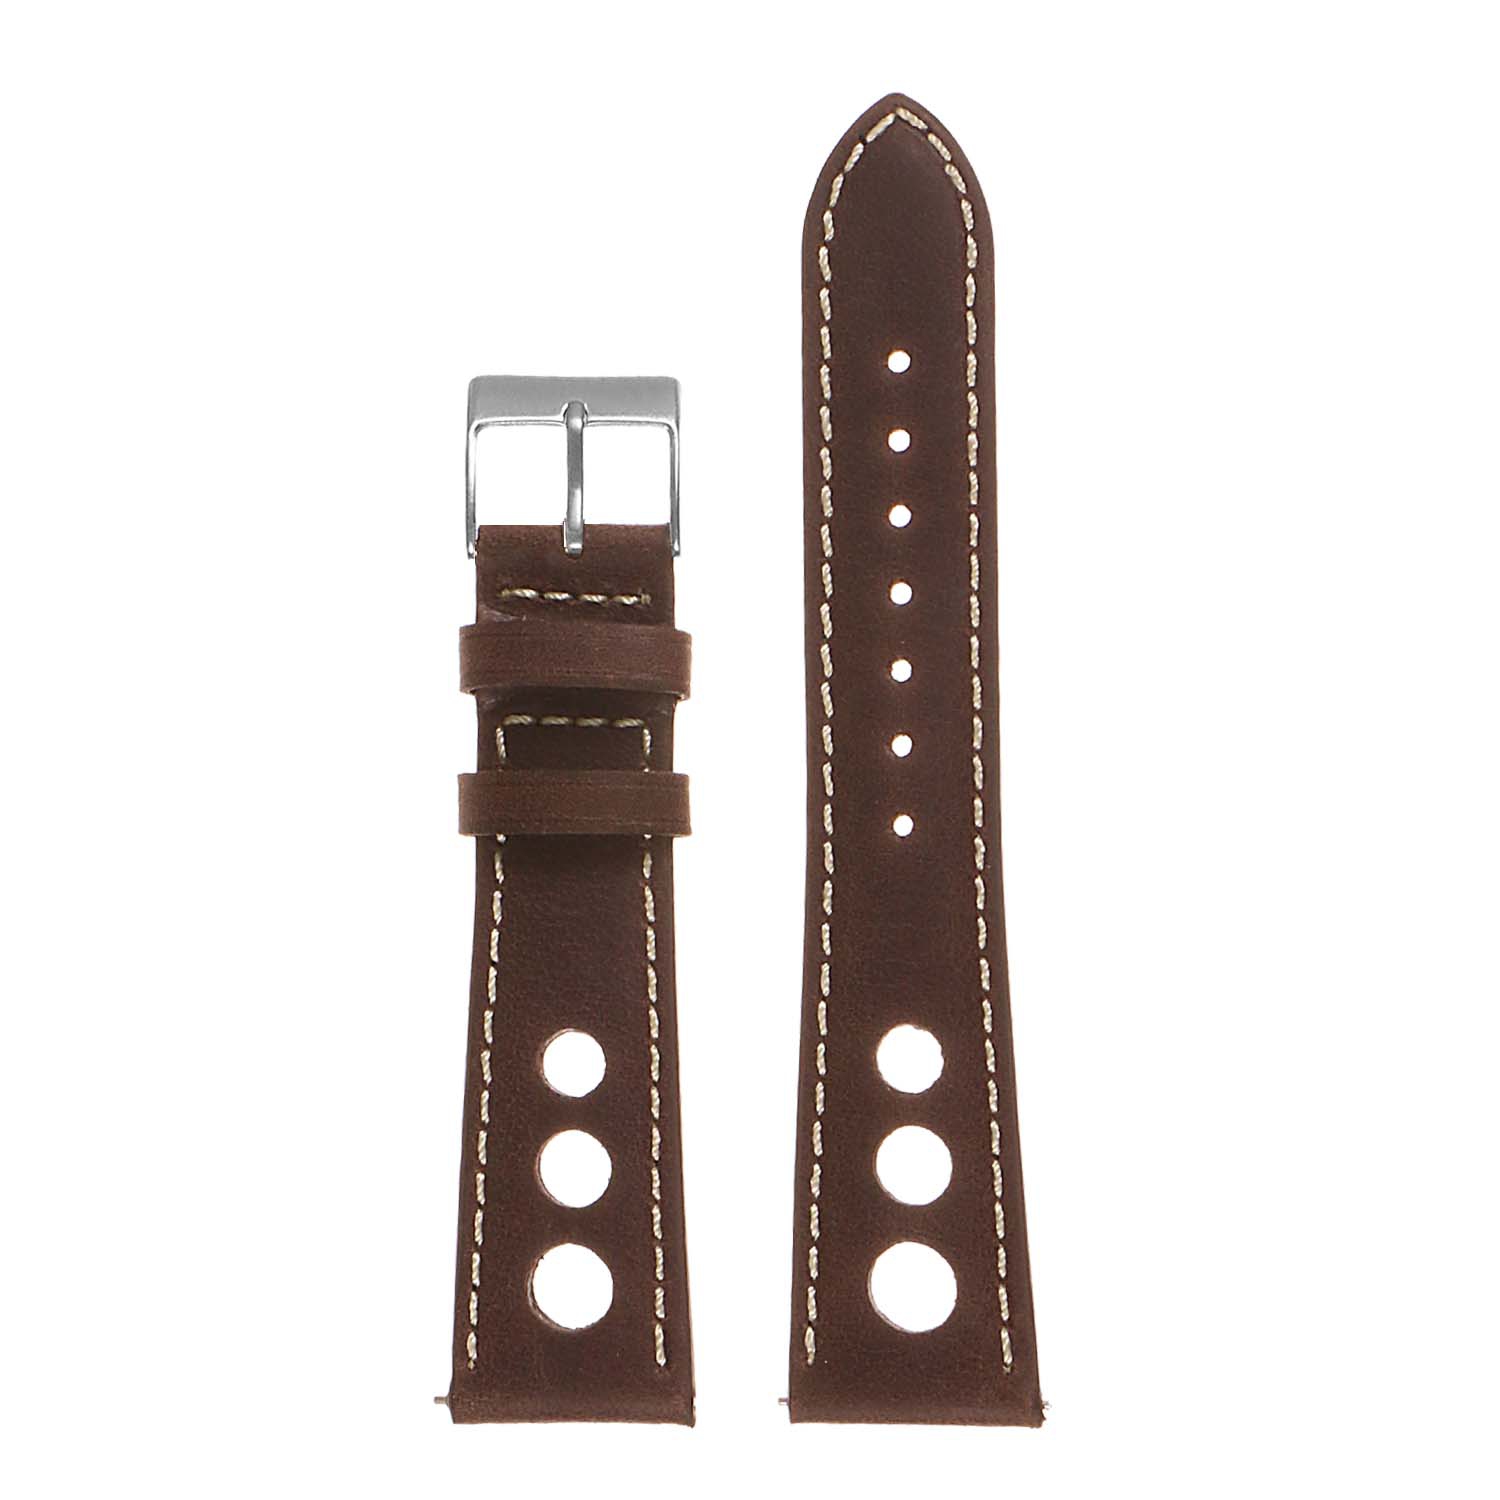 DASSARI Carrera Distressed Leather GT Rally Watch Band Strap for Samsung Galaxy Watch 3 - 22mm - For 45mm Galaxy Watch3 - Brown